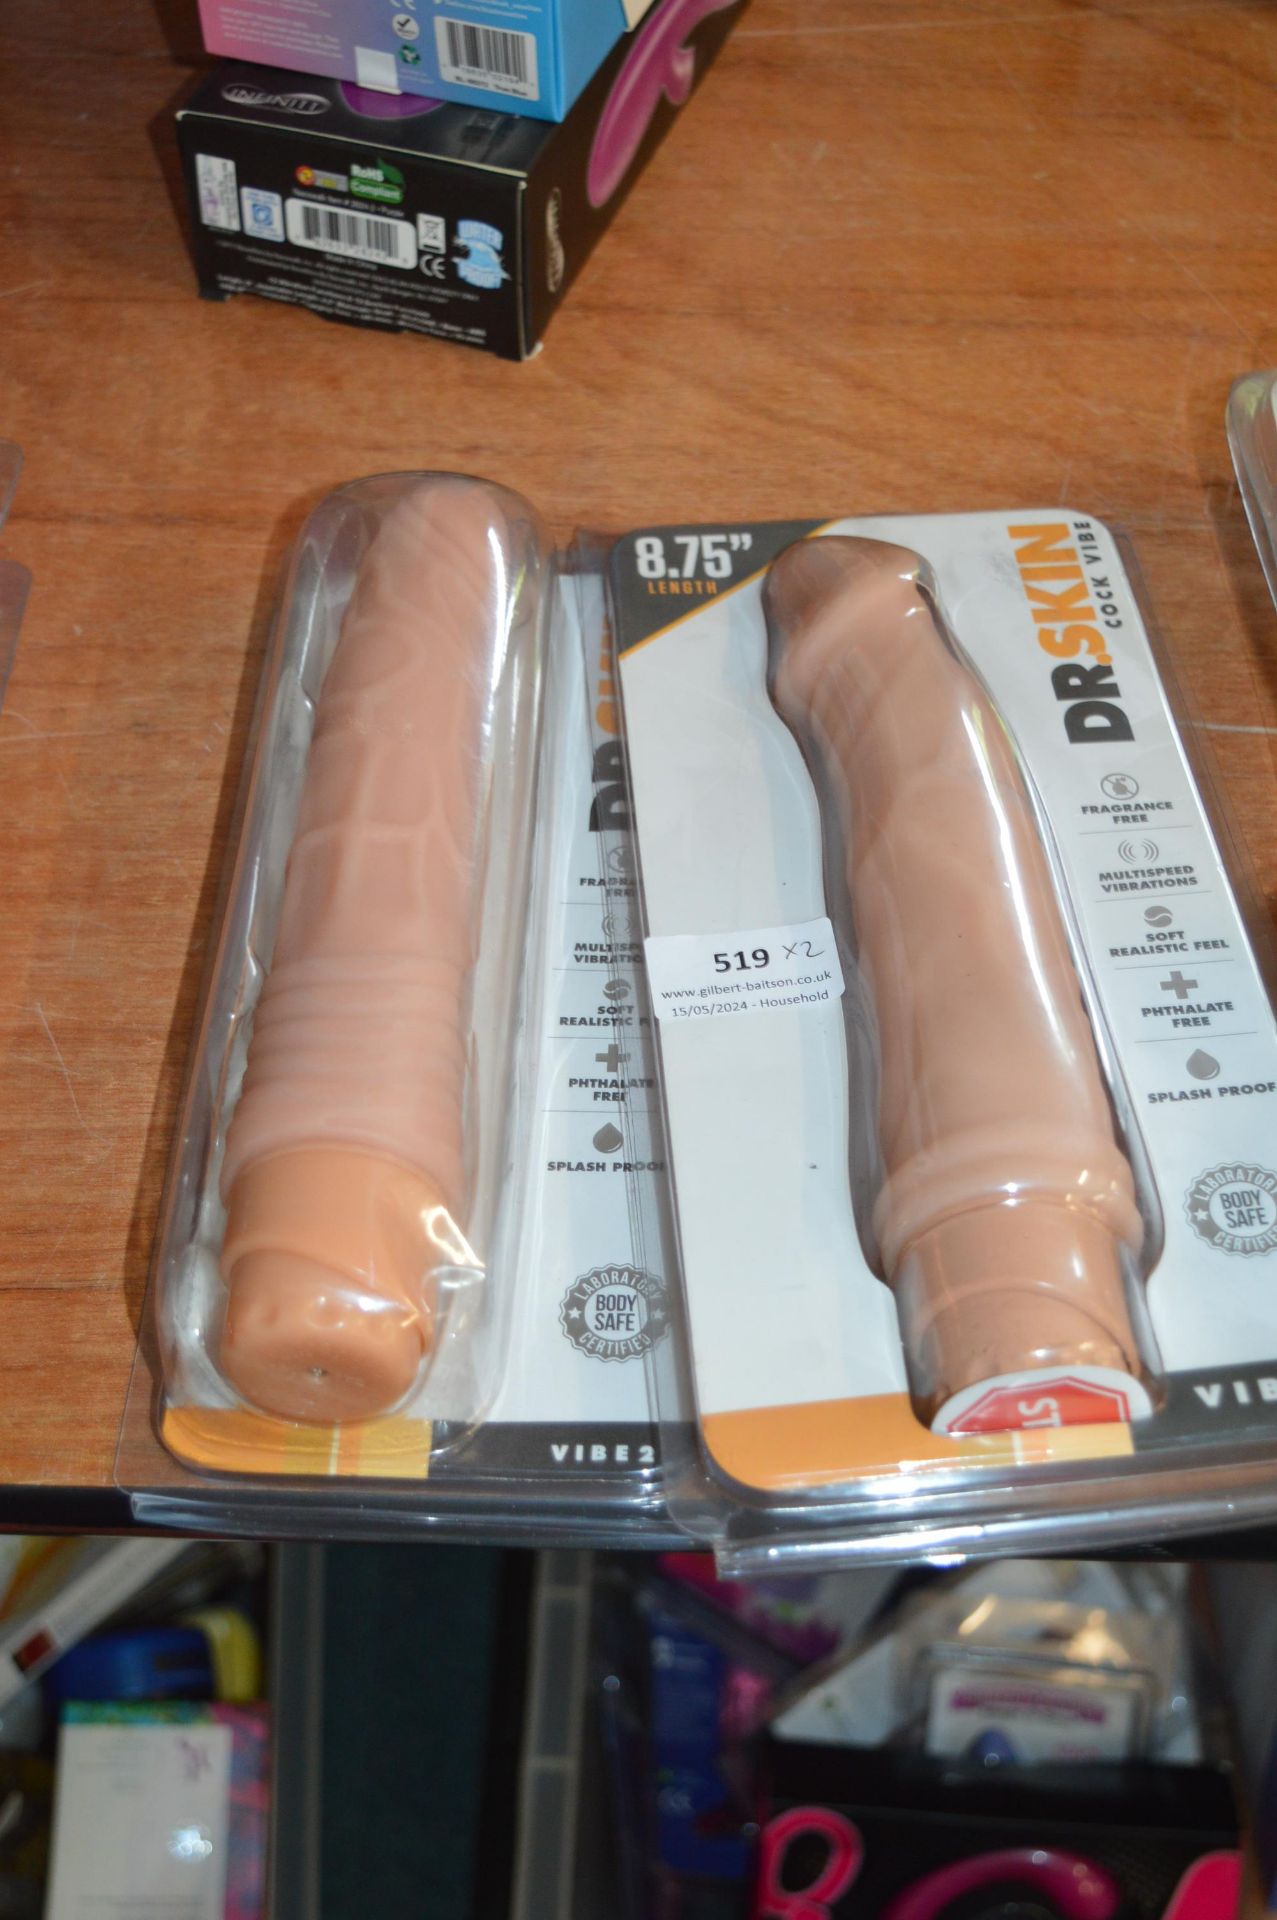 Two Doctor Skin Vibrating Massagers (0ver 18's only)